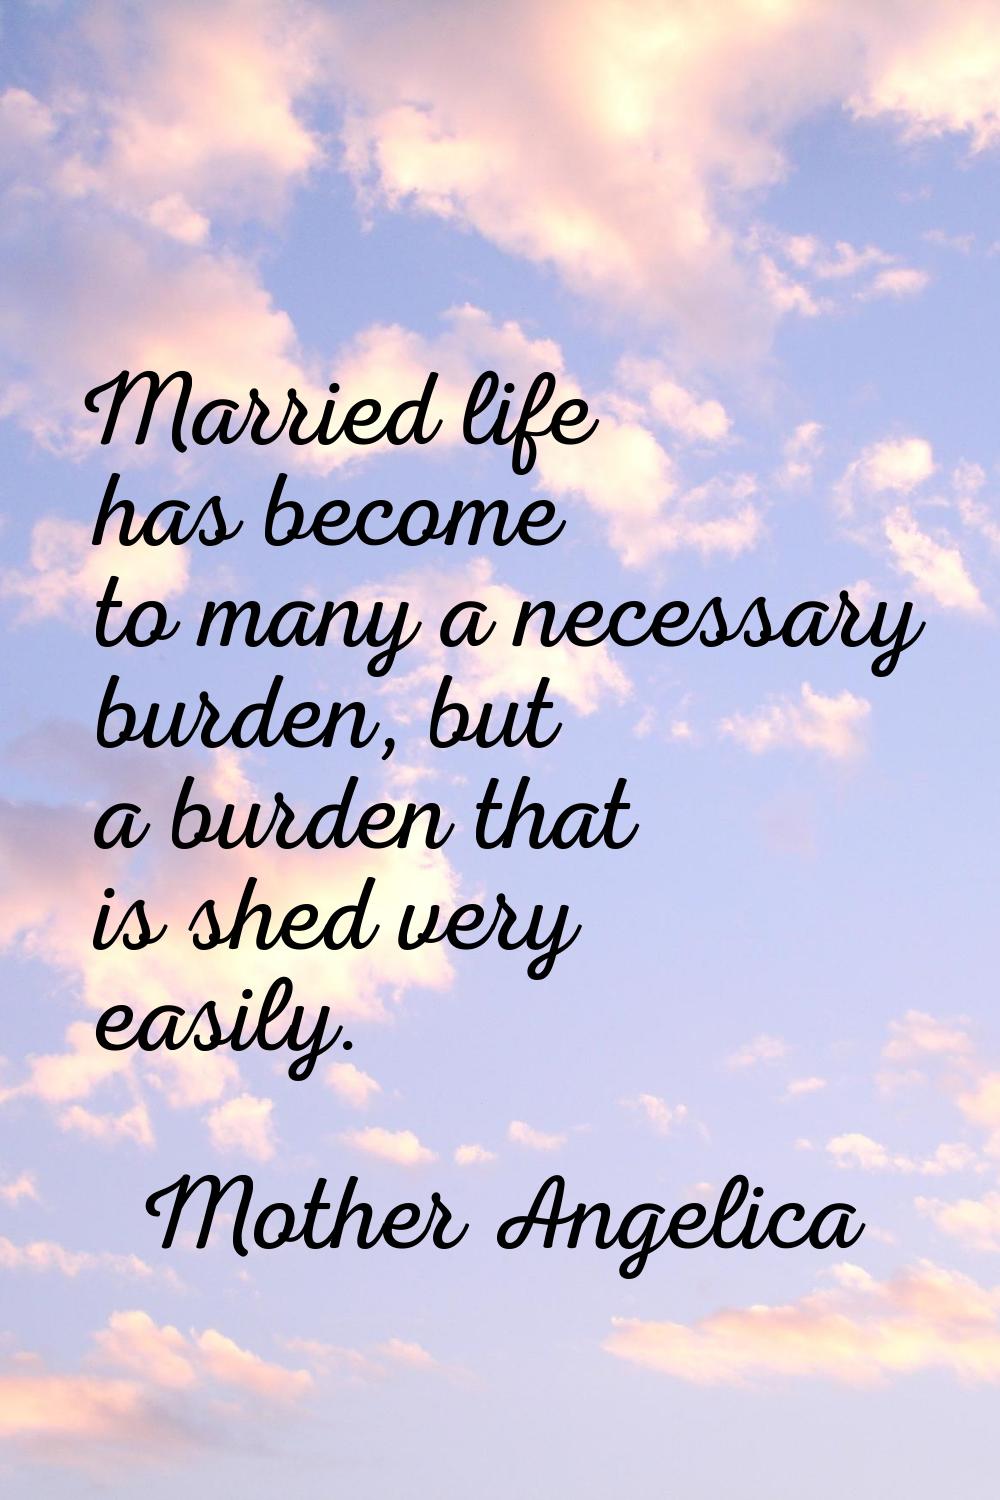 Married life has become to many a necessary burden, but a burden that is shed very easily.